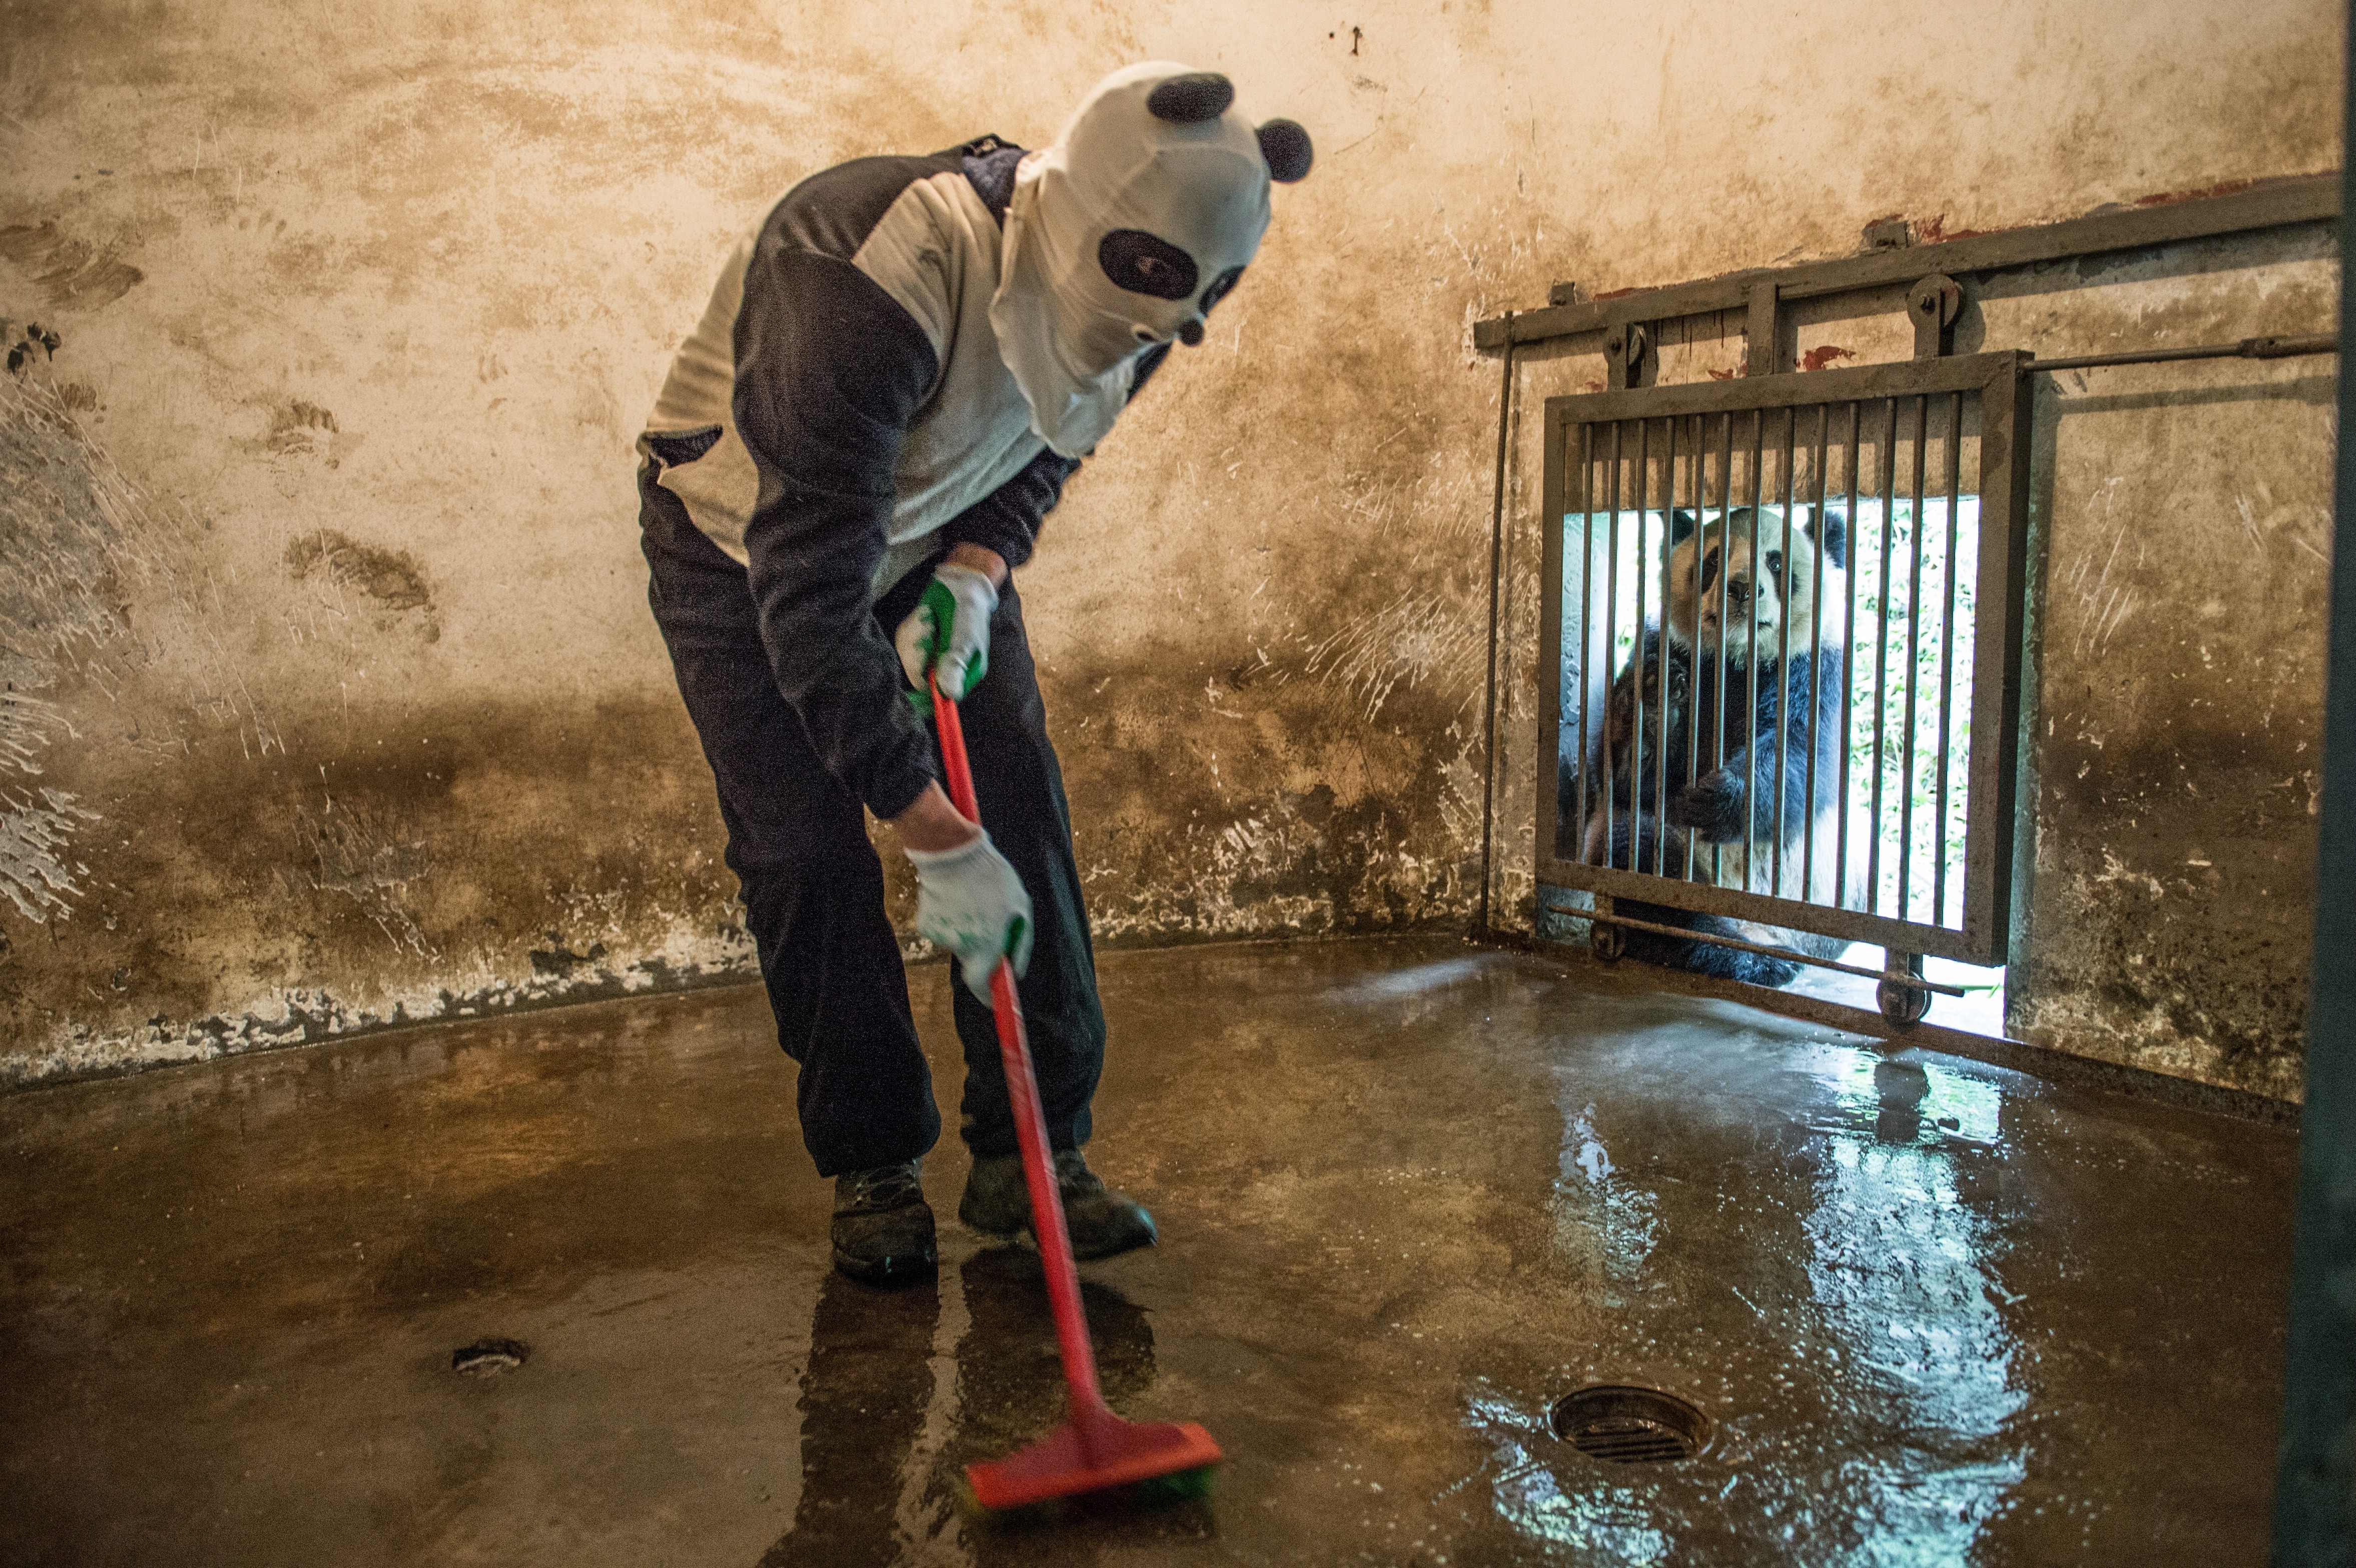 <strong>Bearly human</strong> A costumed caretaker cleans a giant-panda enclosure while an inhabitant peers in (Photograph by Ami Vitale)